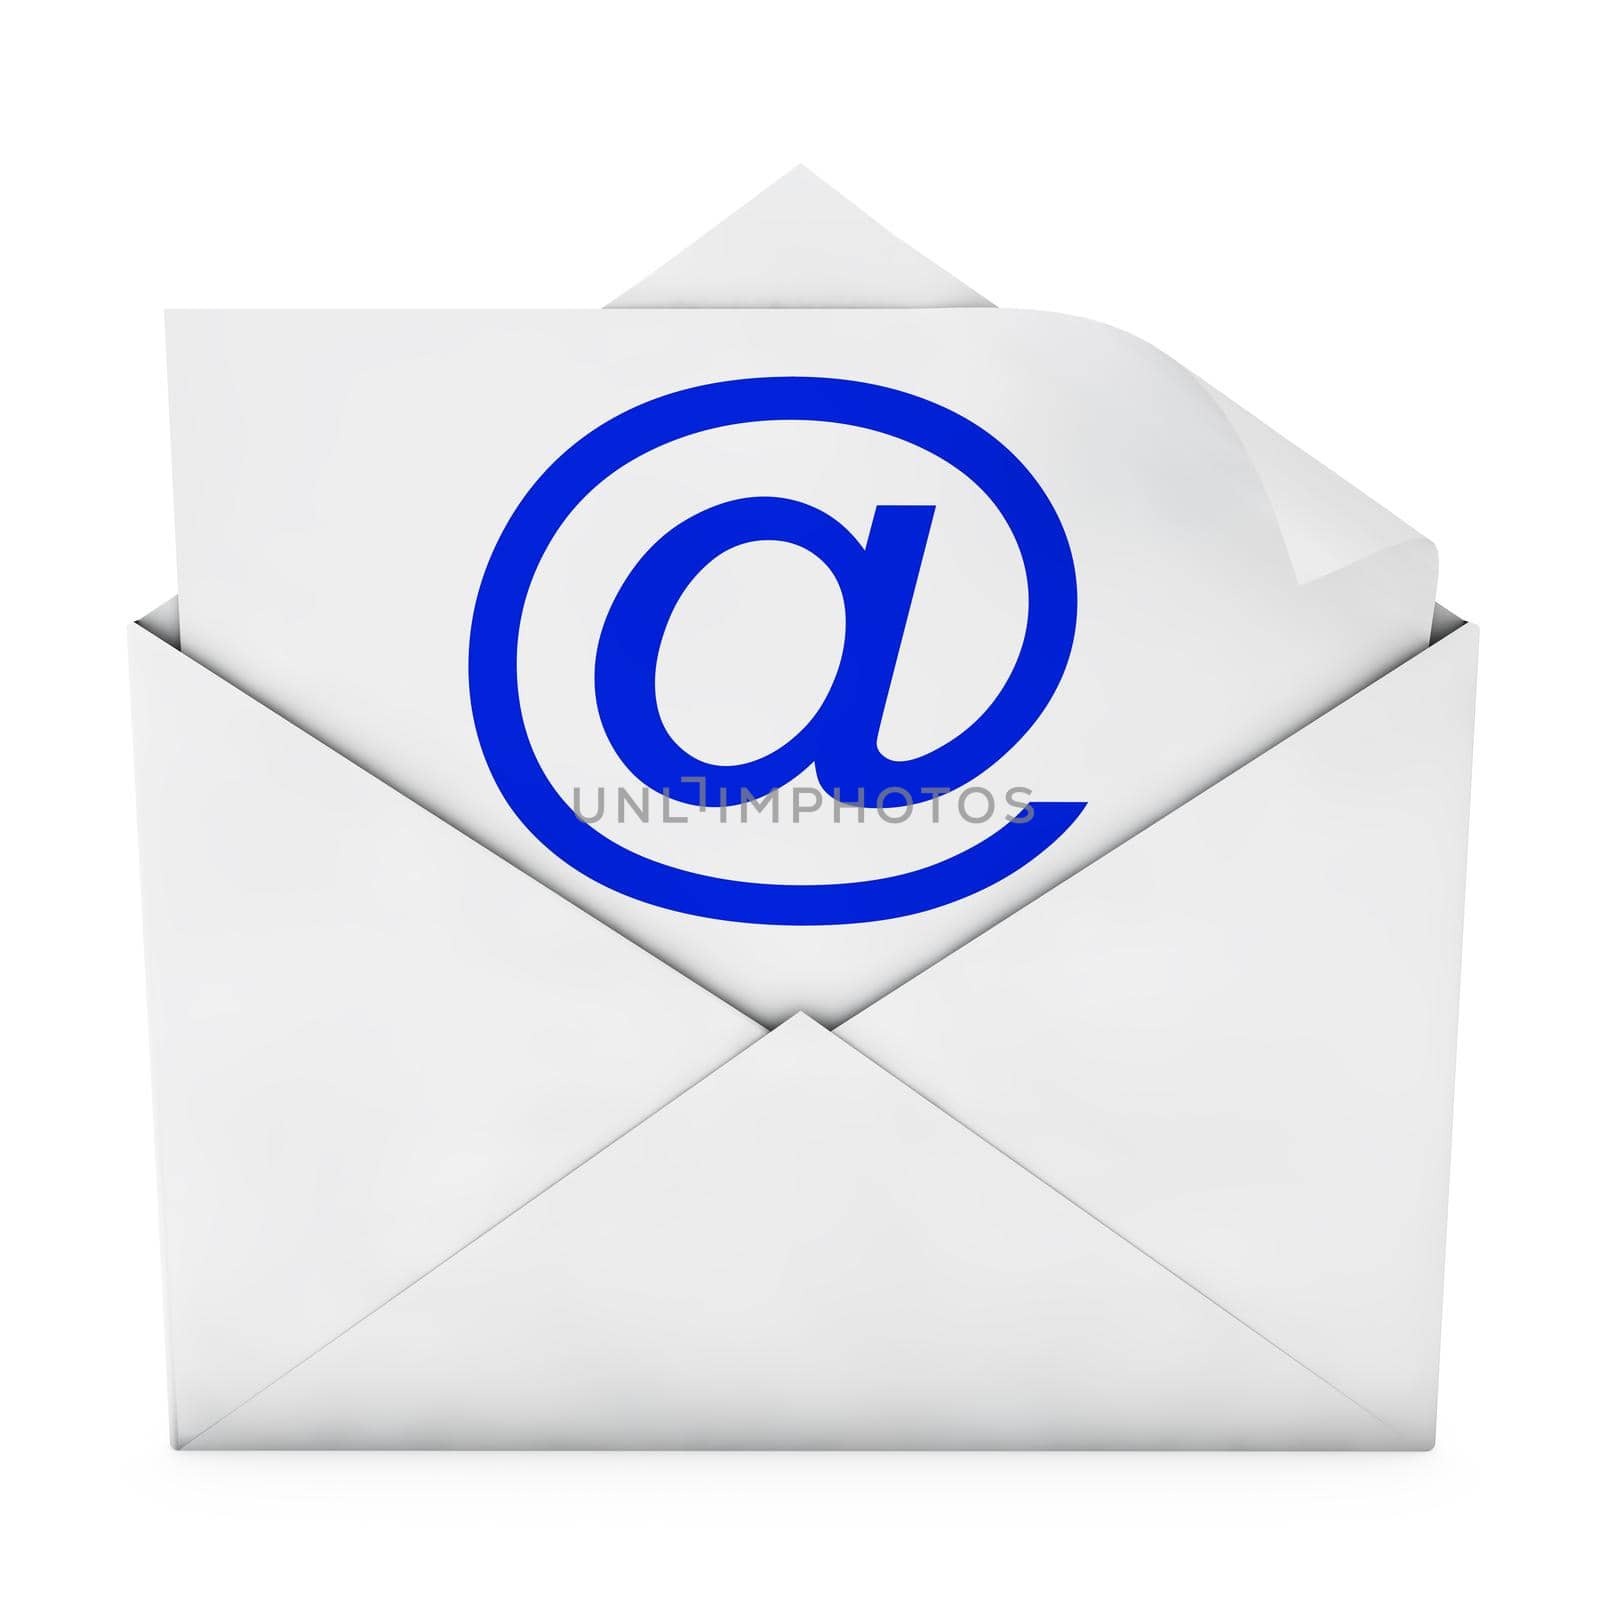 envelope with a sheet of paper which depicts email sign